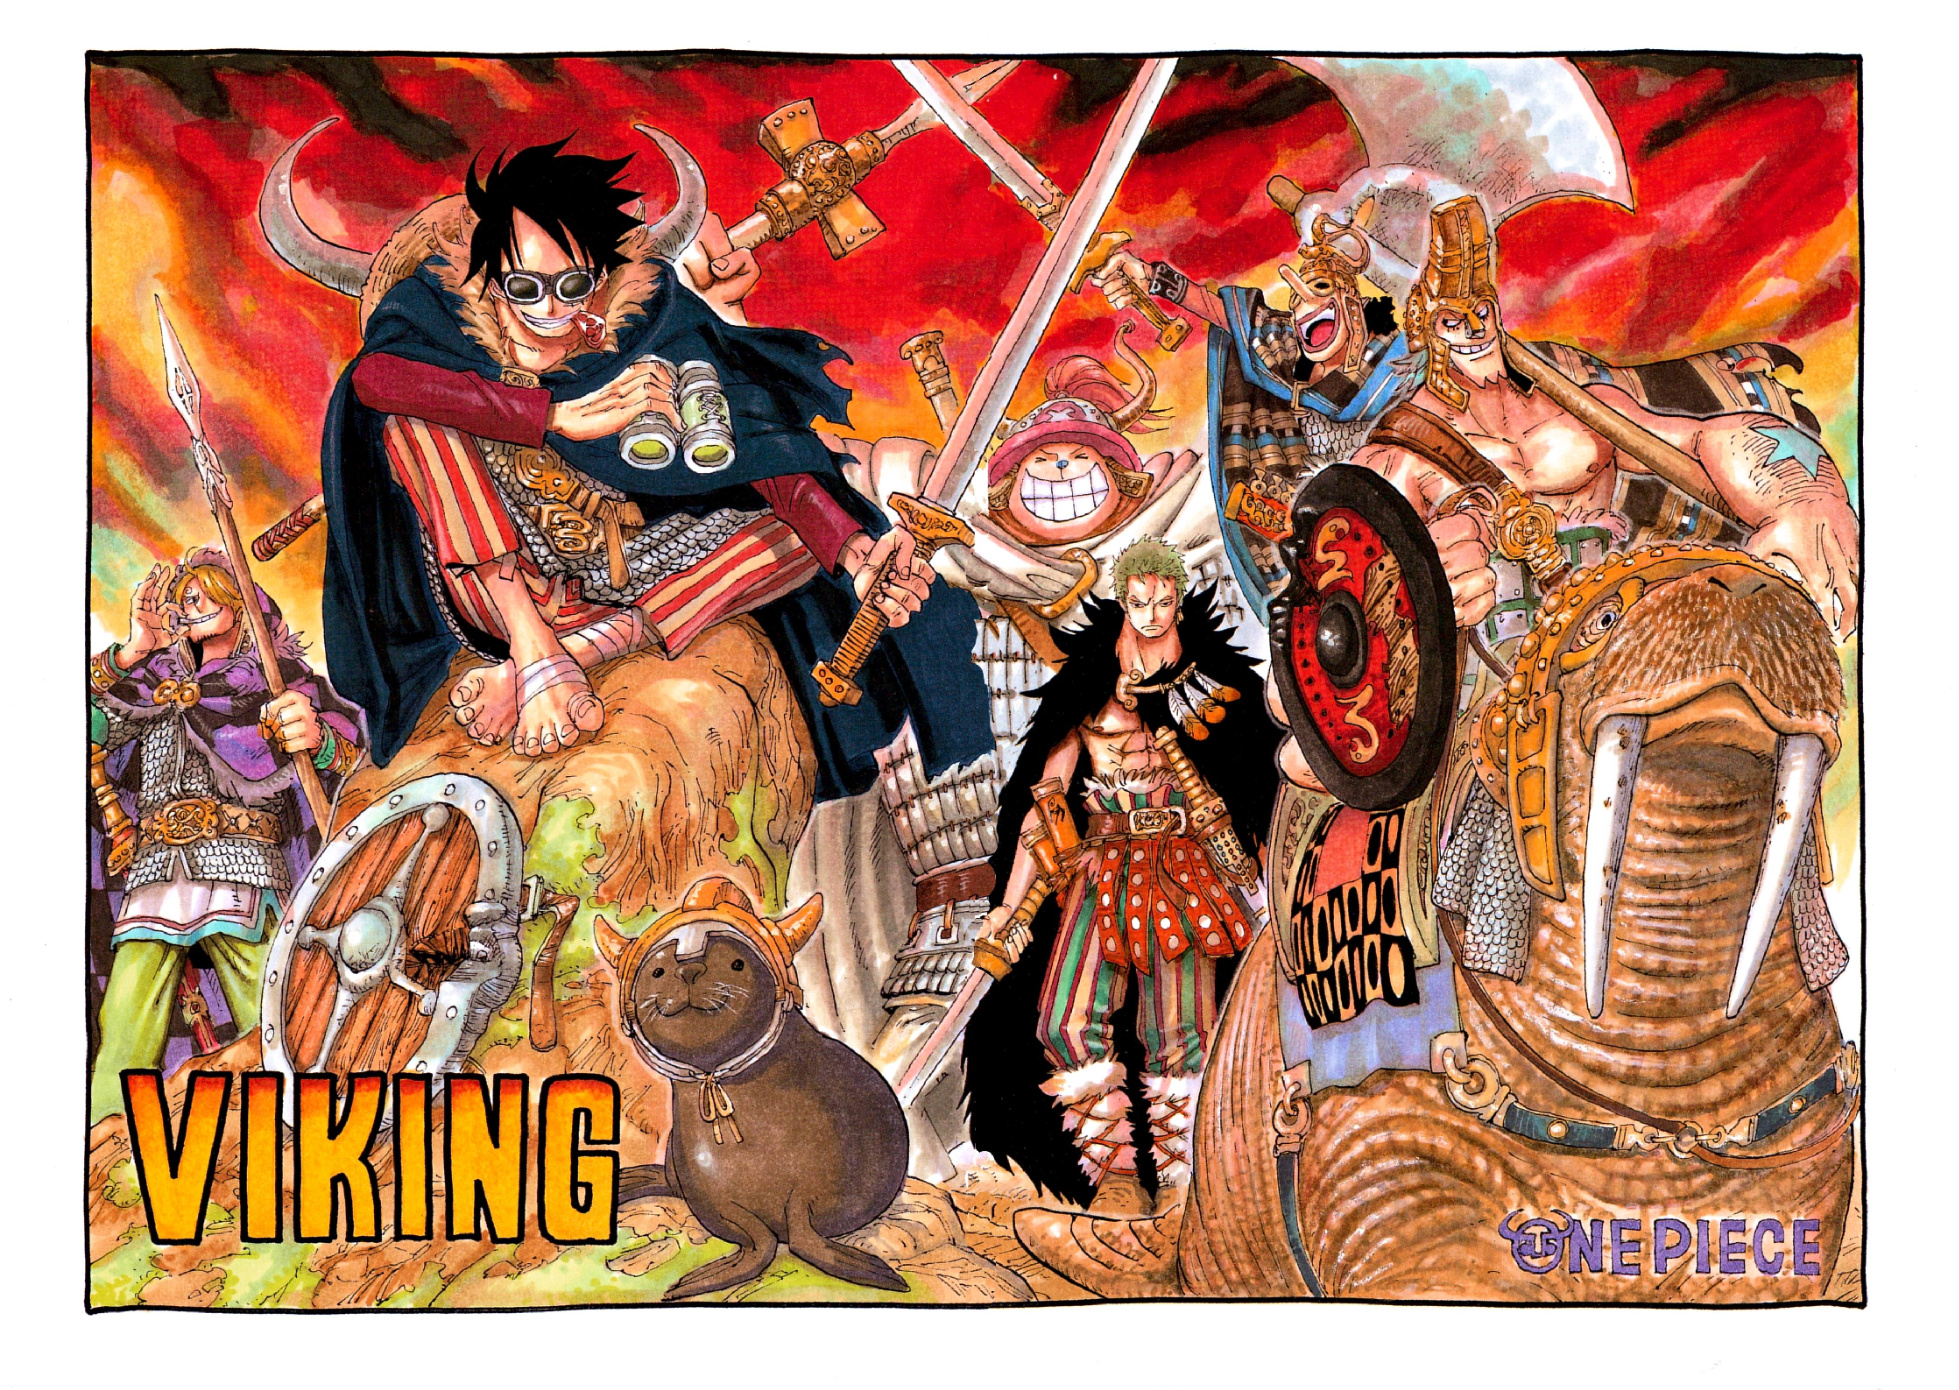 Chapter 446, One Piece Wiki